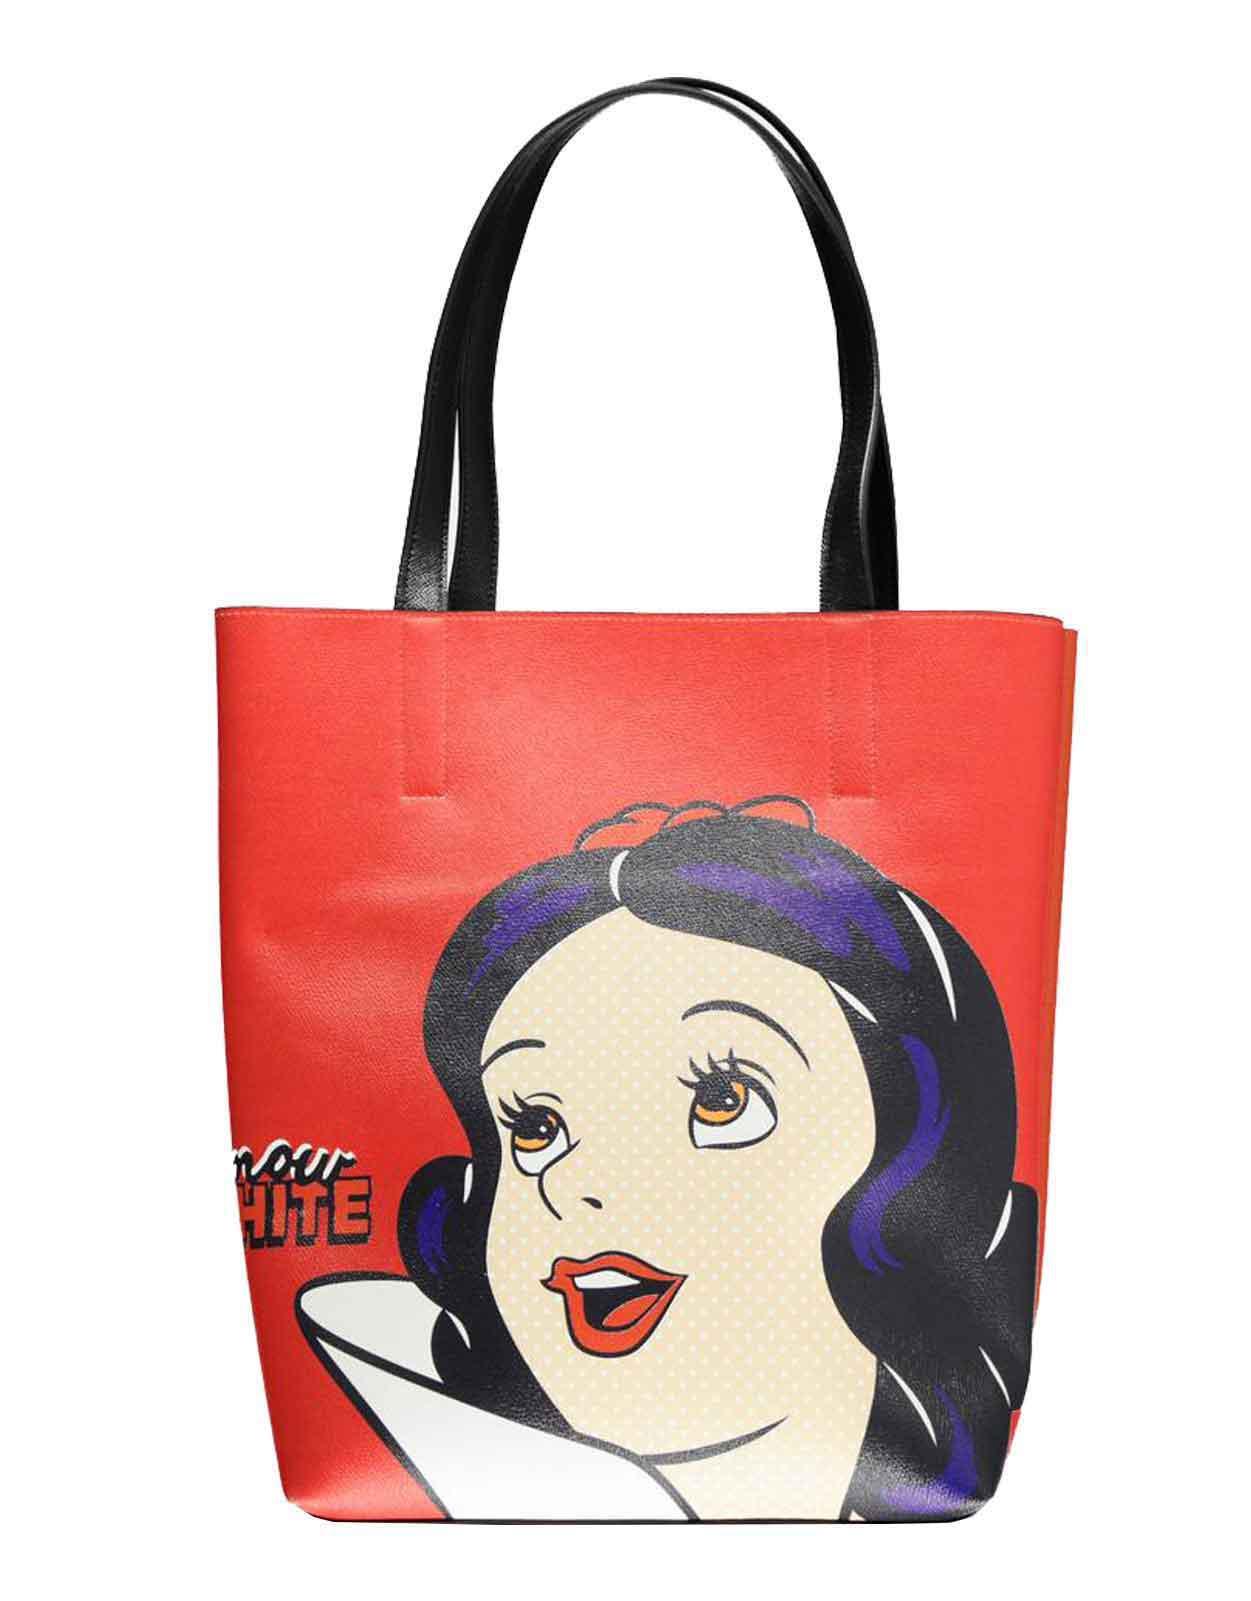 Snow White Shopper Bag Tote portrait Print new Official Disney Red One Size